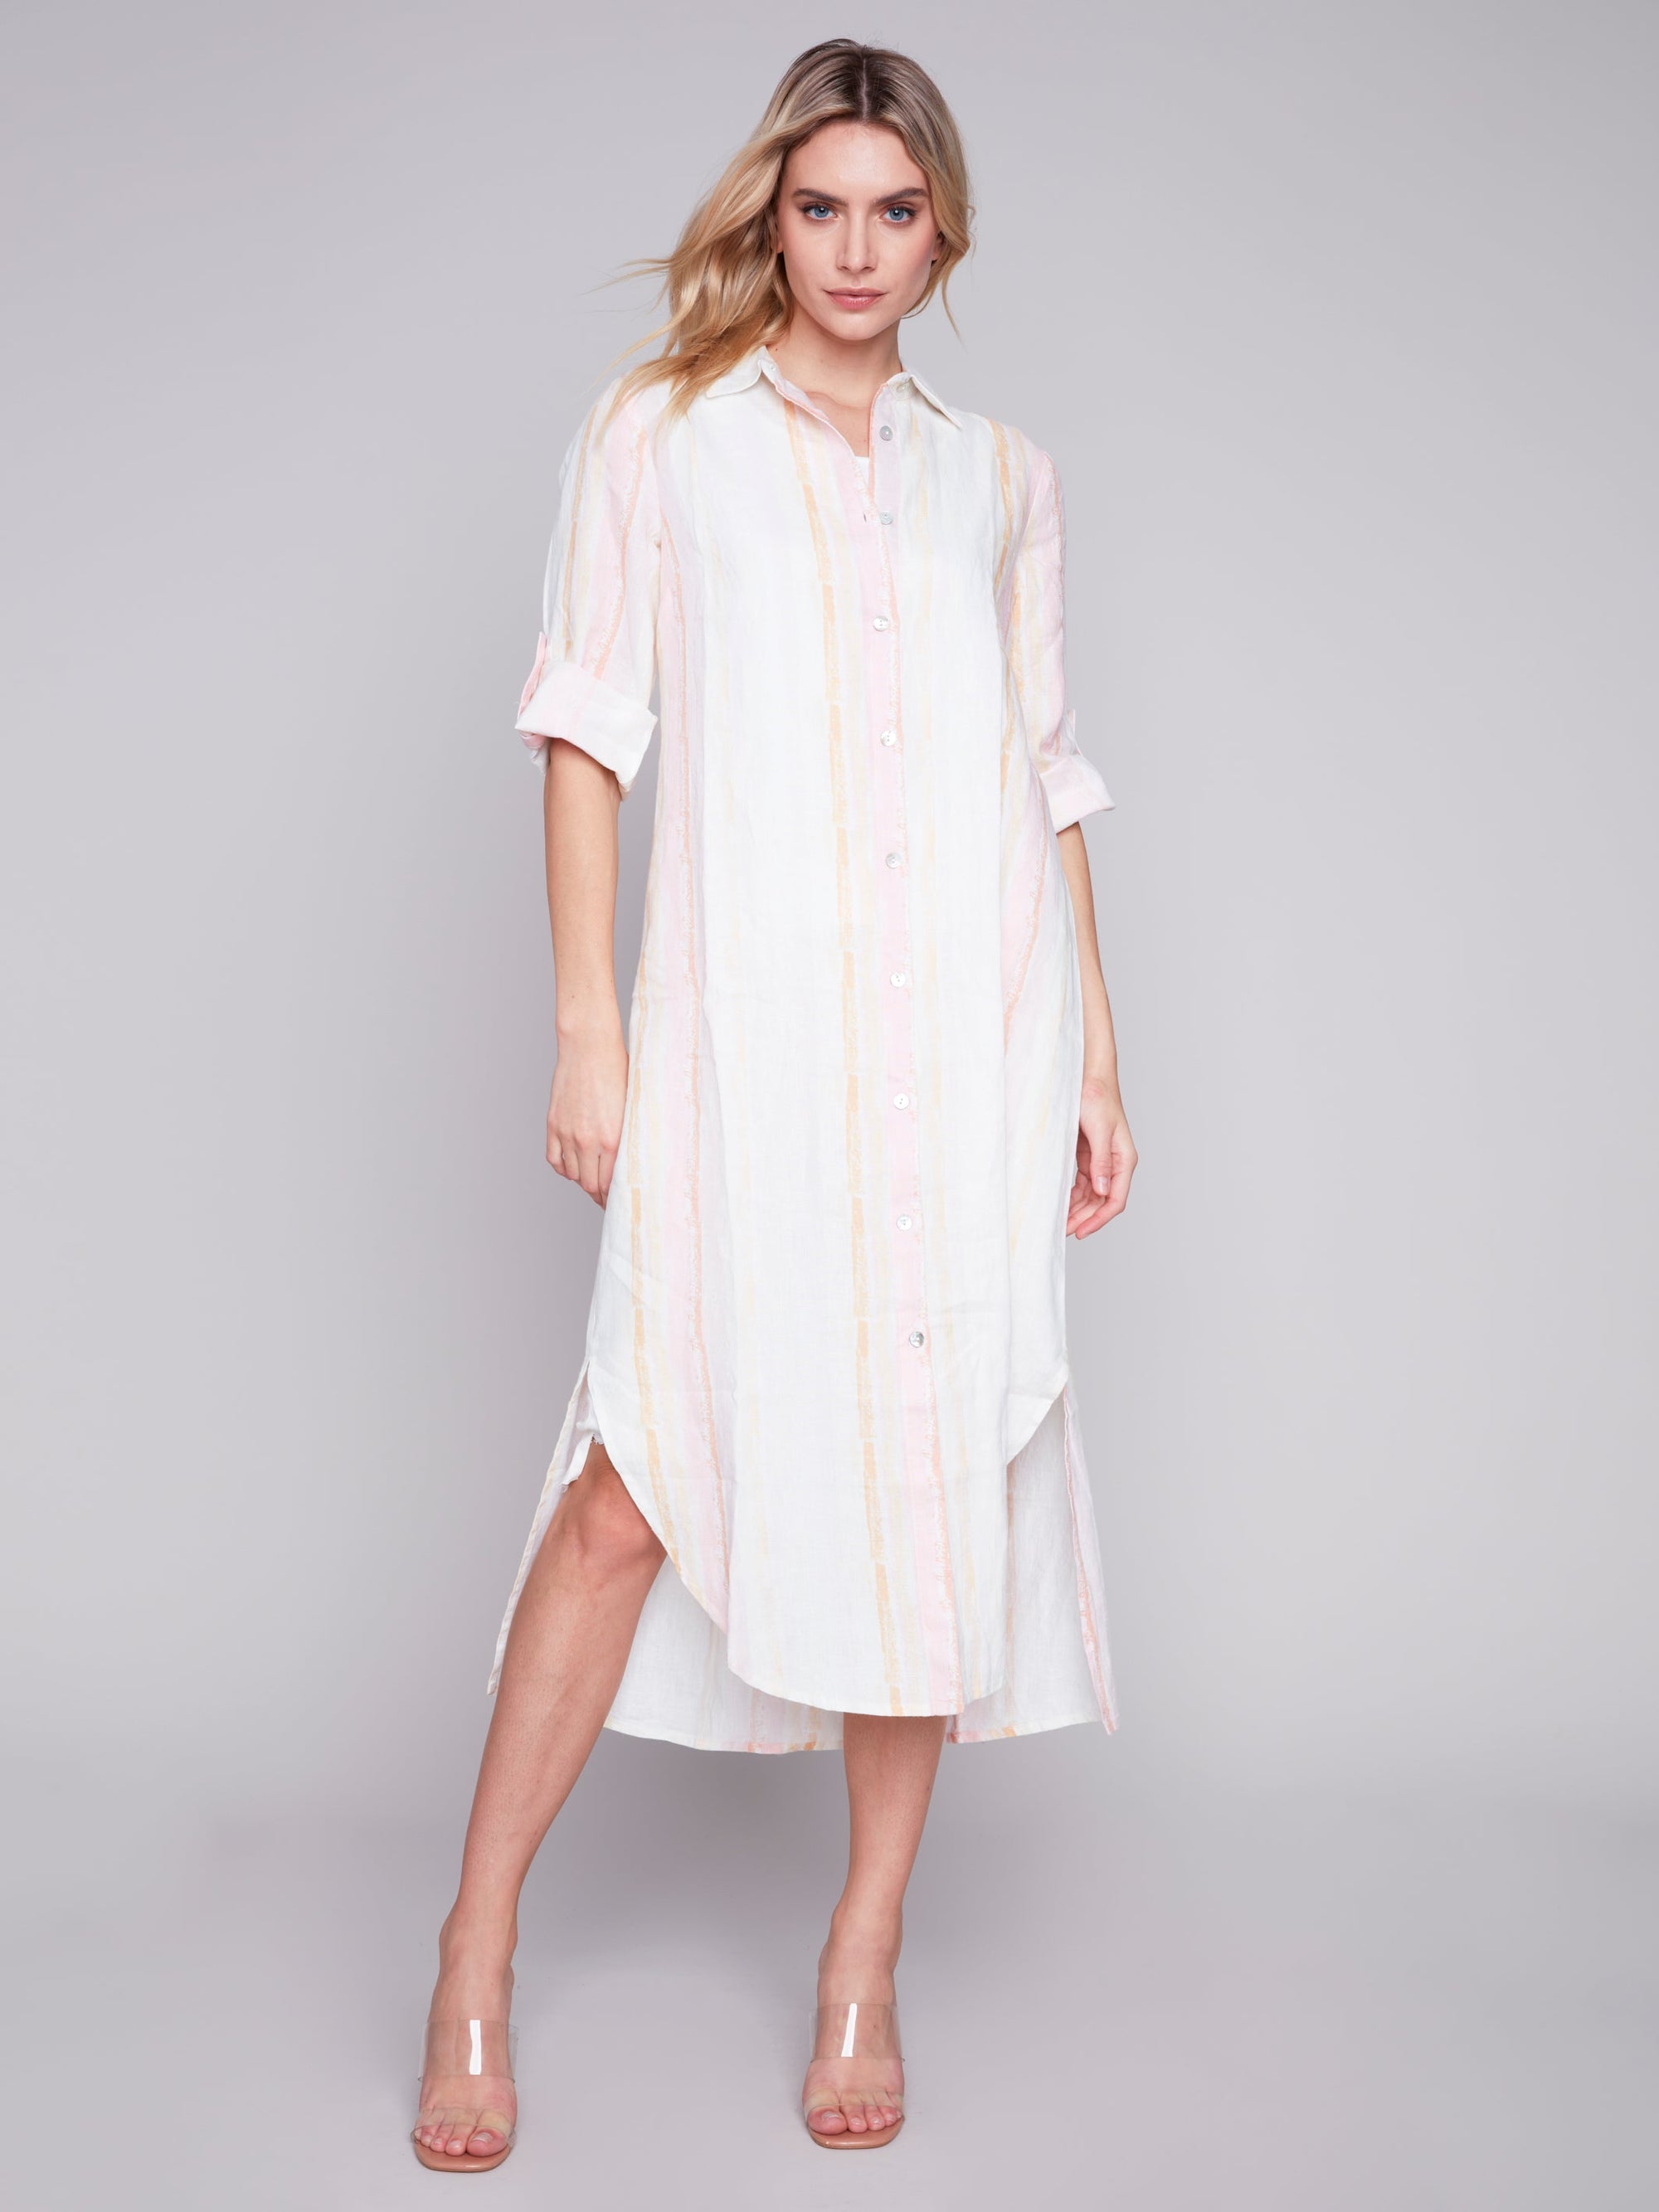 LONG TUNIC with ROLL UP SLEEVES-Dresses-CHARLIE B-XSMALL-PASTEL-Coriander